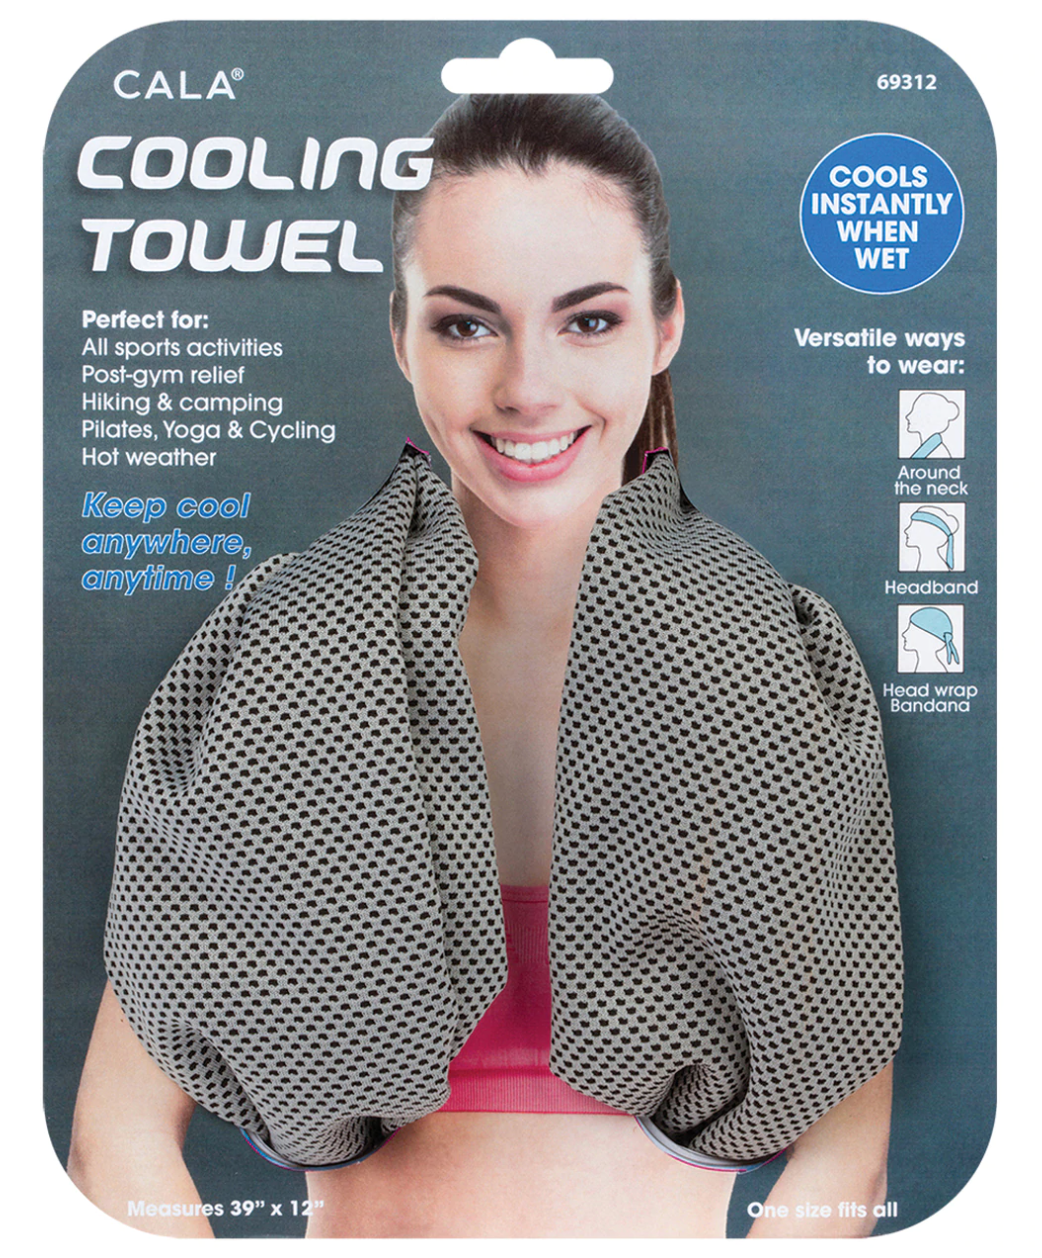 CALA cooling towel, Assorted Colors - 1 Count